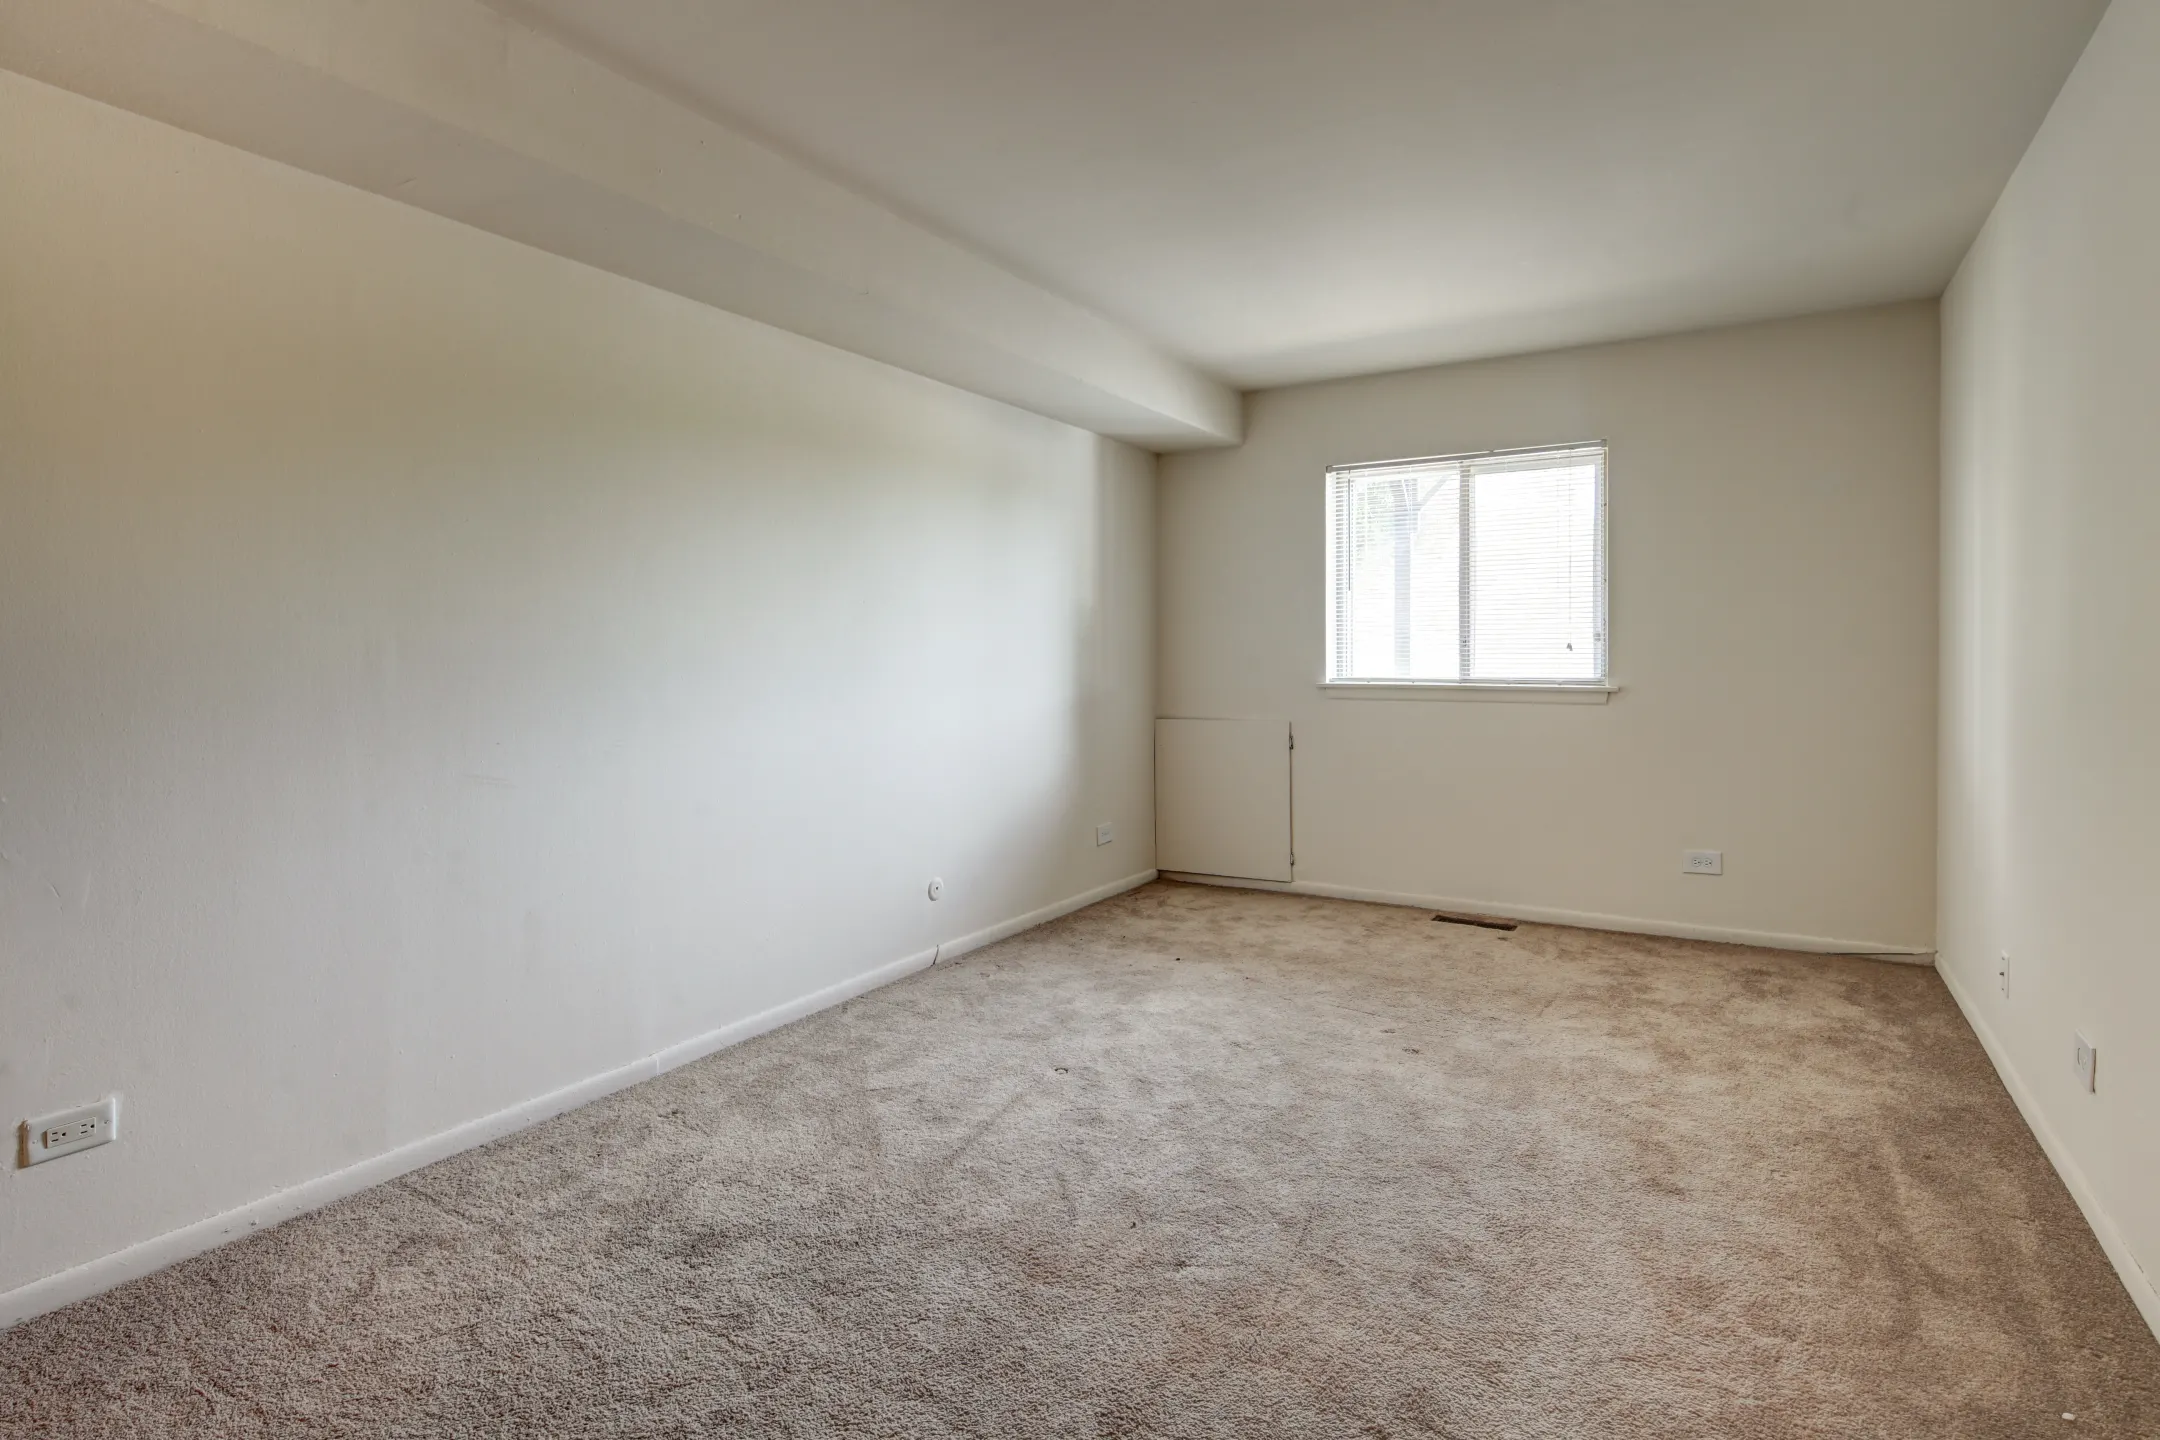 Bedroom - Manchester Court - Oak Forest, IL